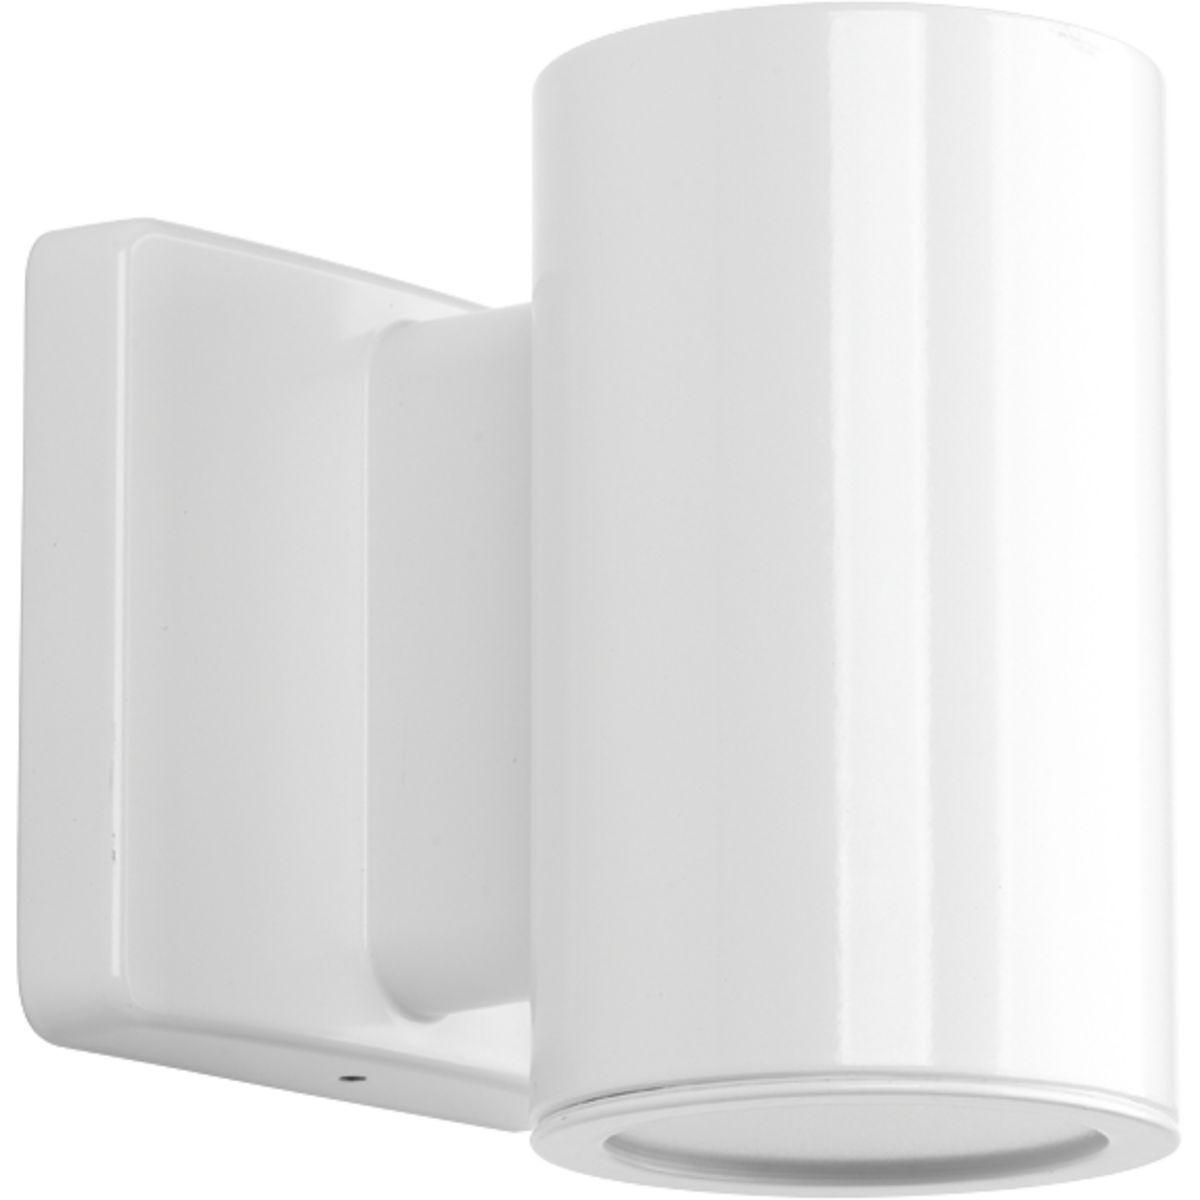 Hubbell P563000-030-30K Sleek, 3" LED cylindrical wall lantern with downlight in elegant White finish. Die-cast aluminum wall brackets and heavy-duty aluminum framing. Fade and chip-resistant. UL listed for wet locations. Can be used indoor or outdoor.  ; 3" LED wall mount downl